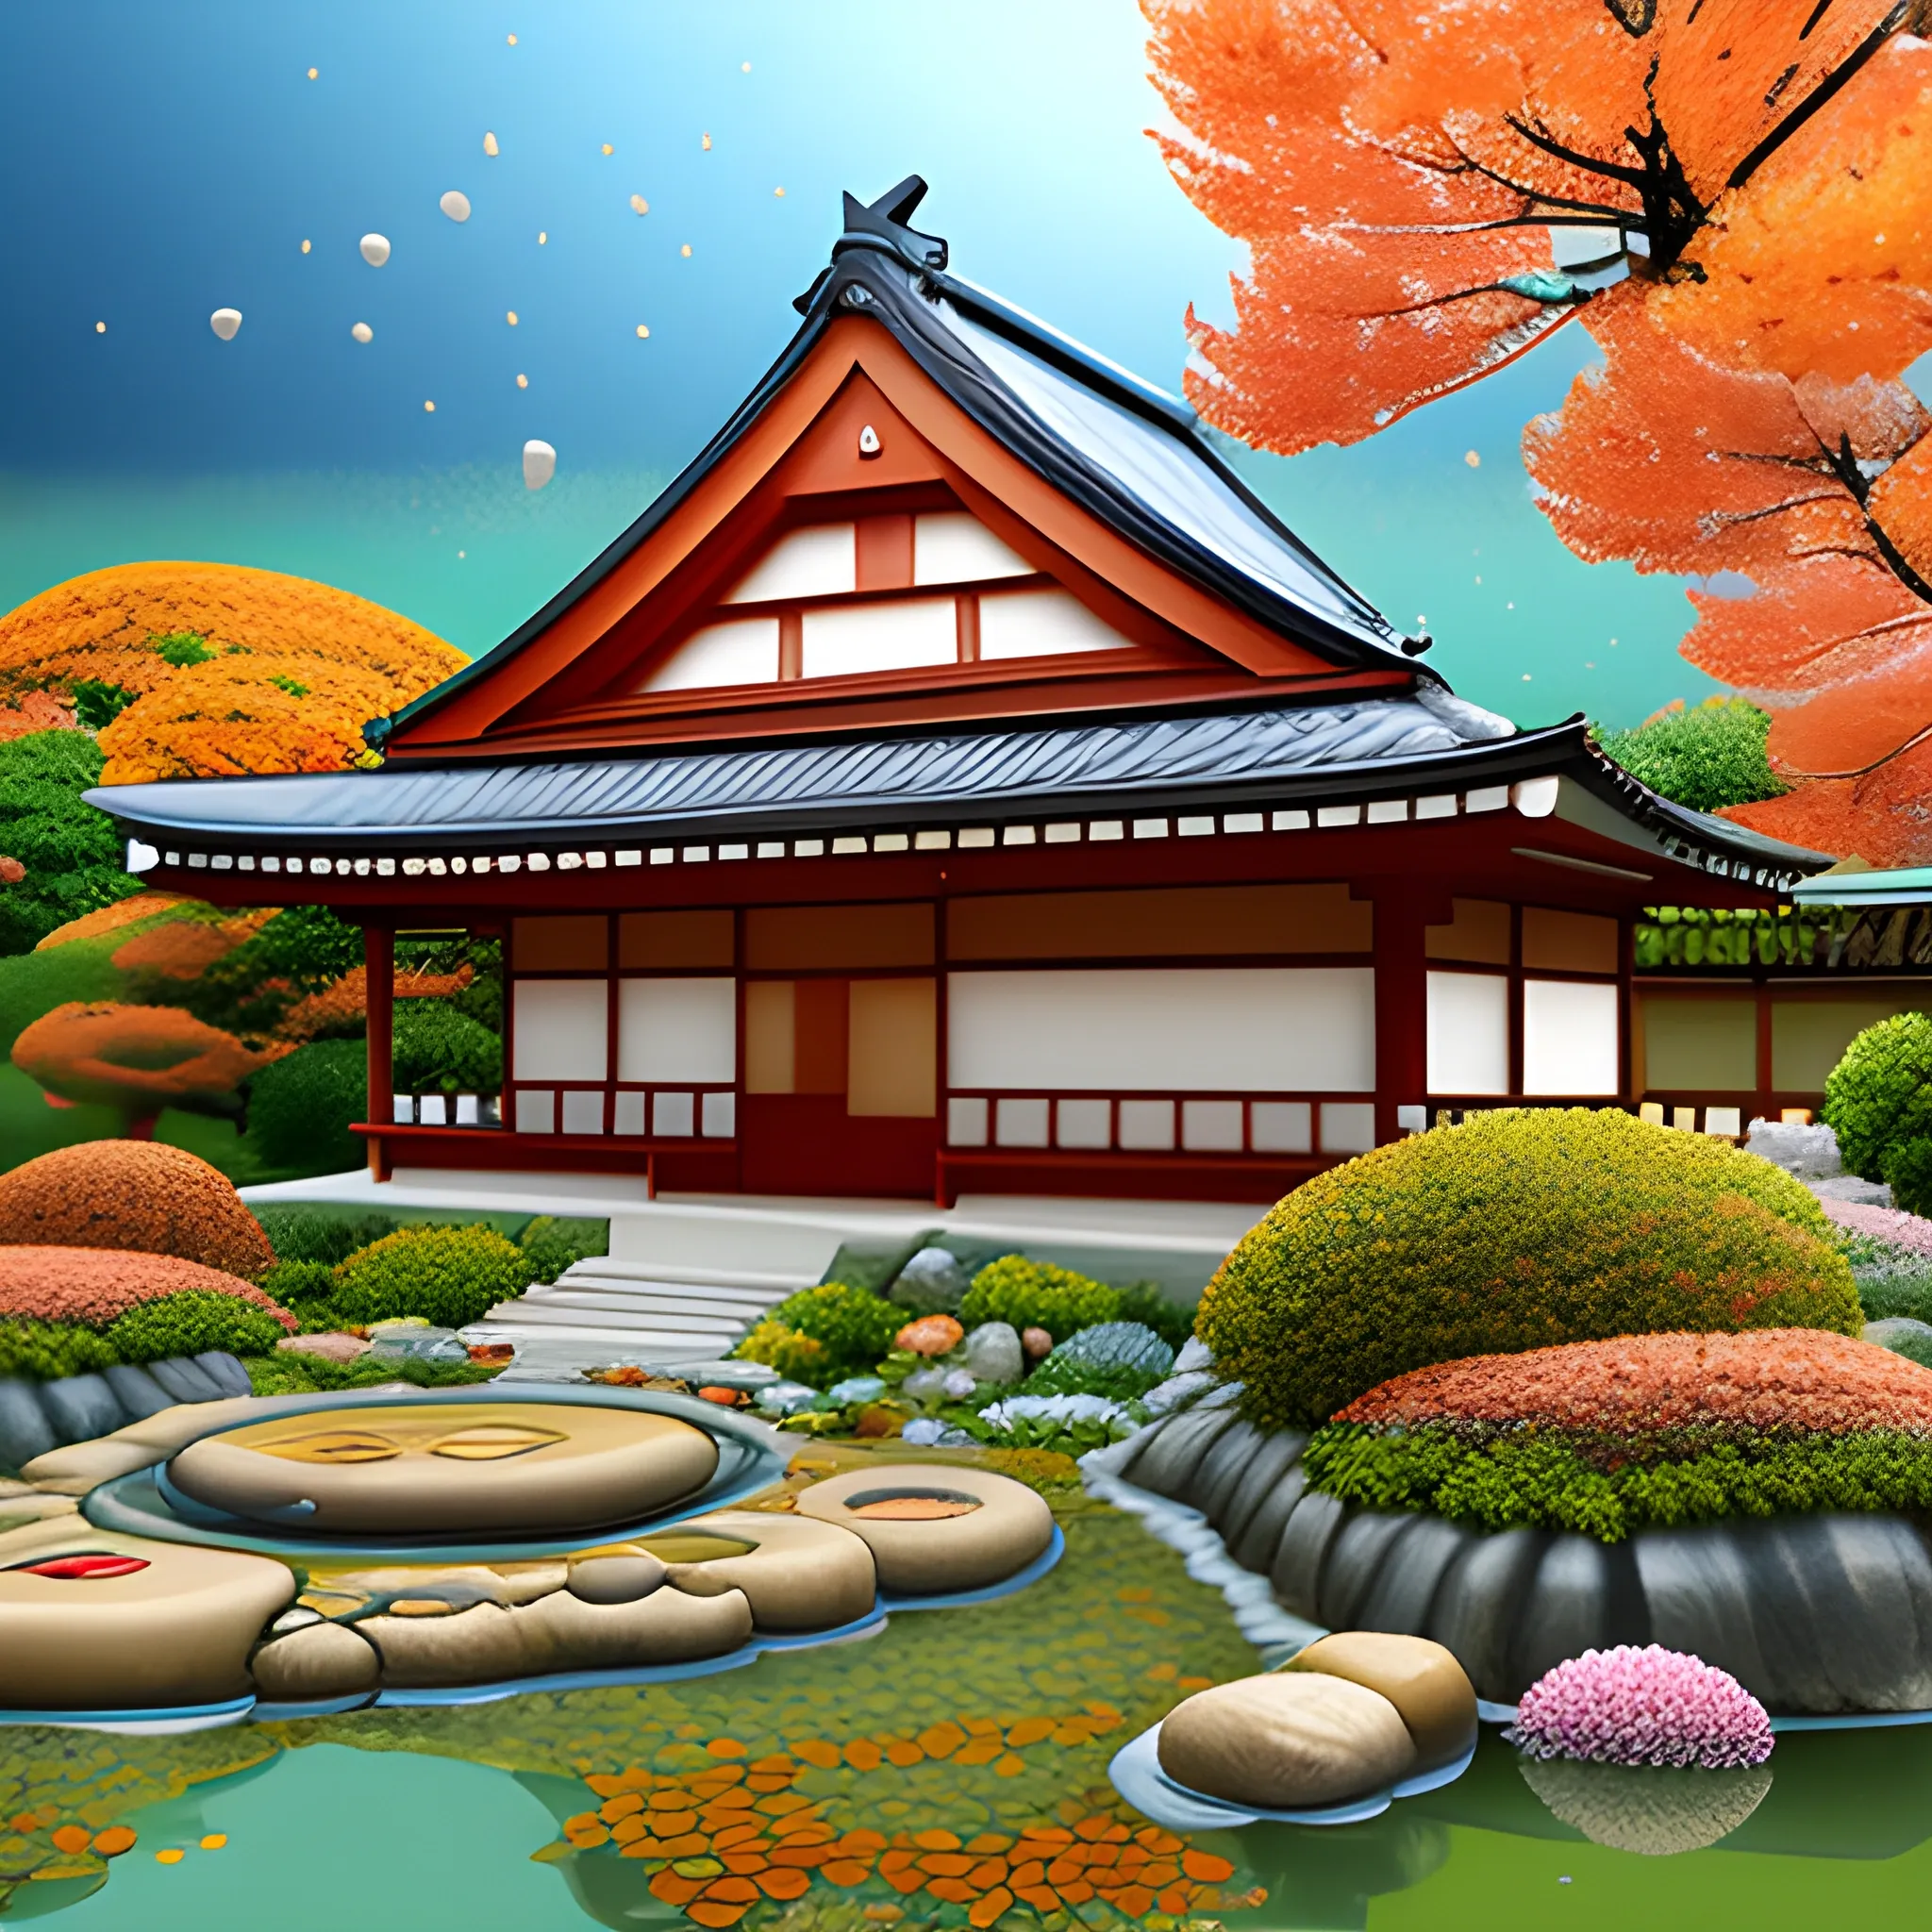 Annual, 3d terracotta illustration create Autumn full flowering around houses of Japan and water dripping from stones with colourfull flowers